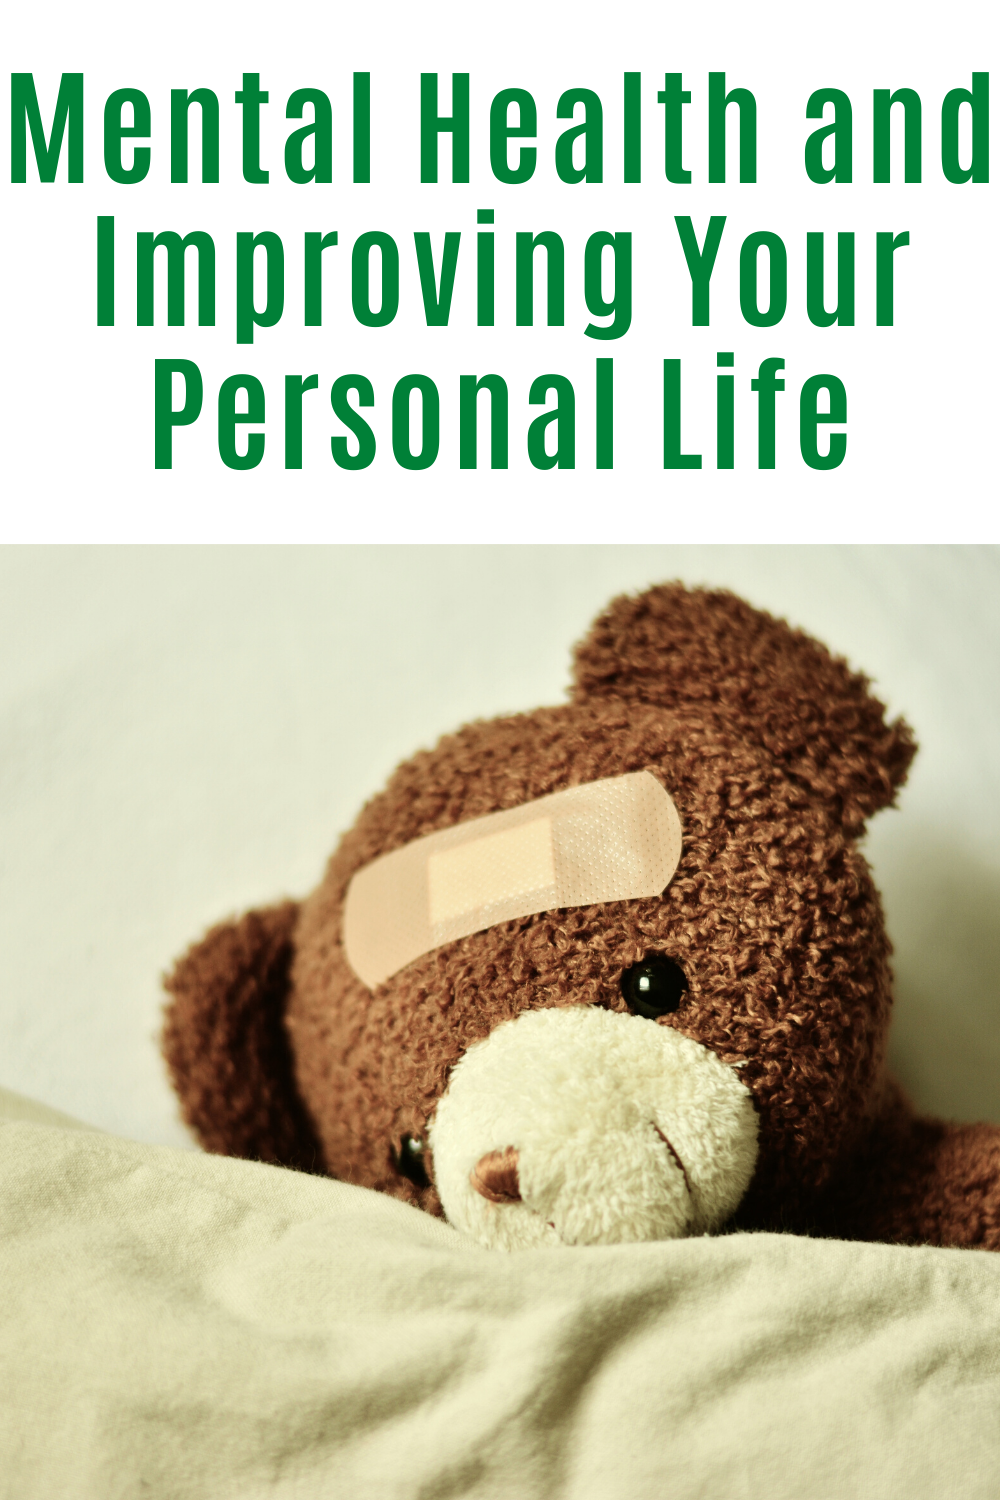 Mental Health and Improving Your Personal Life